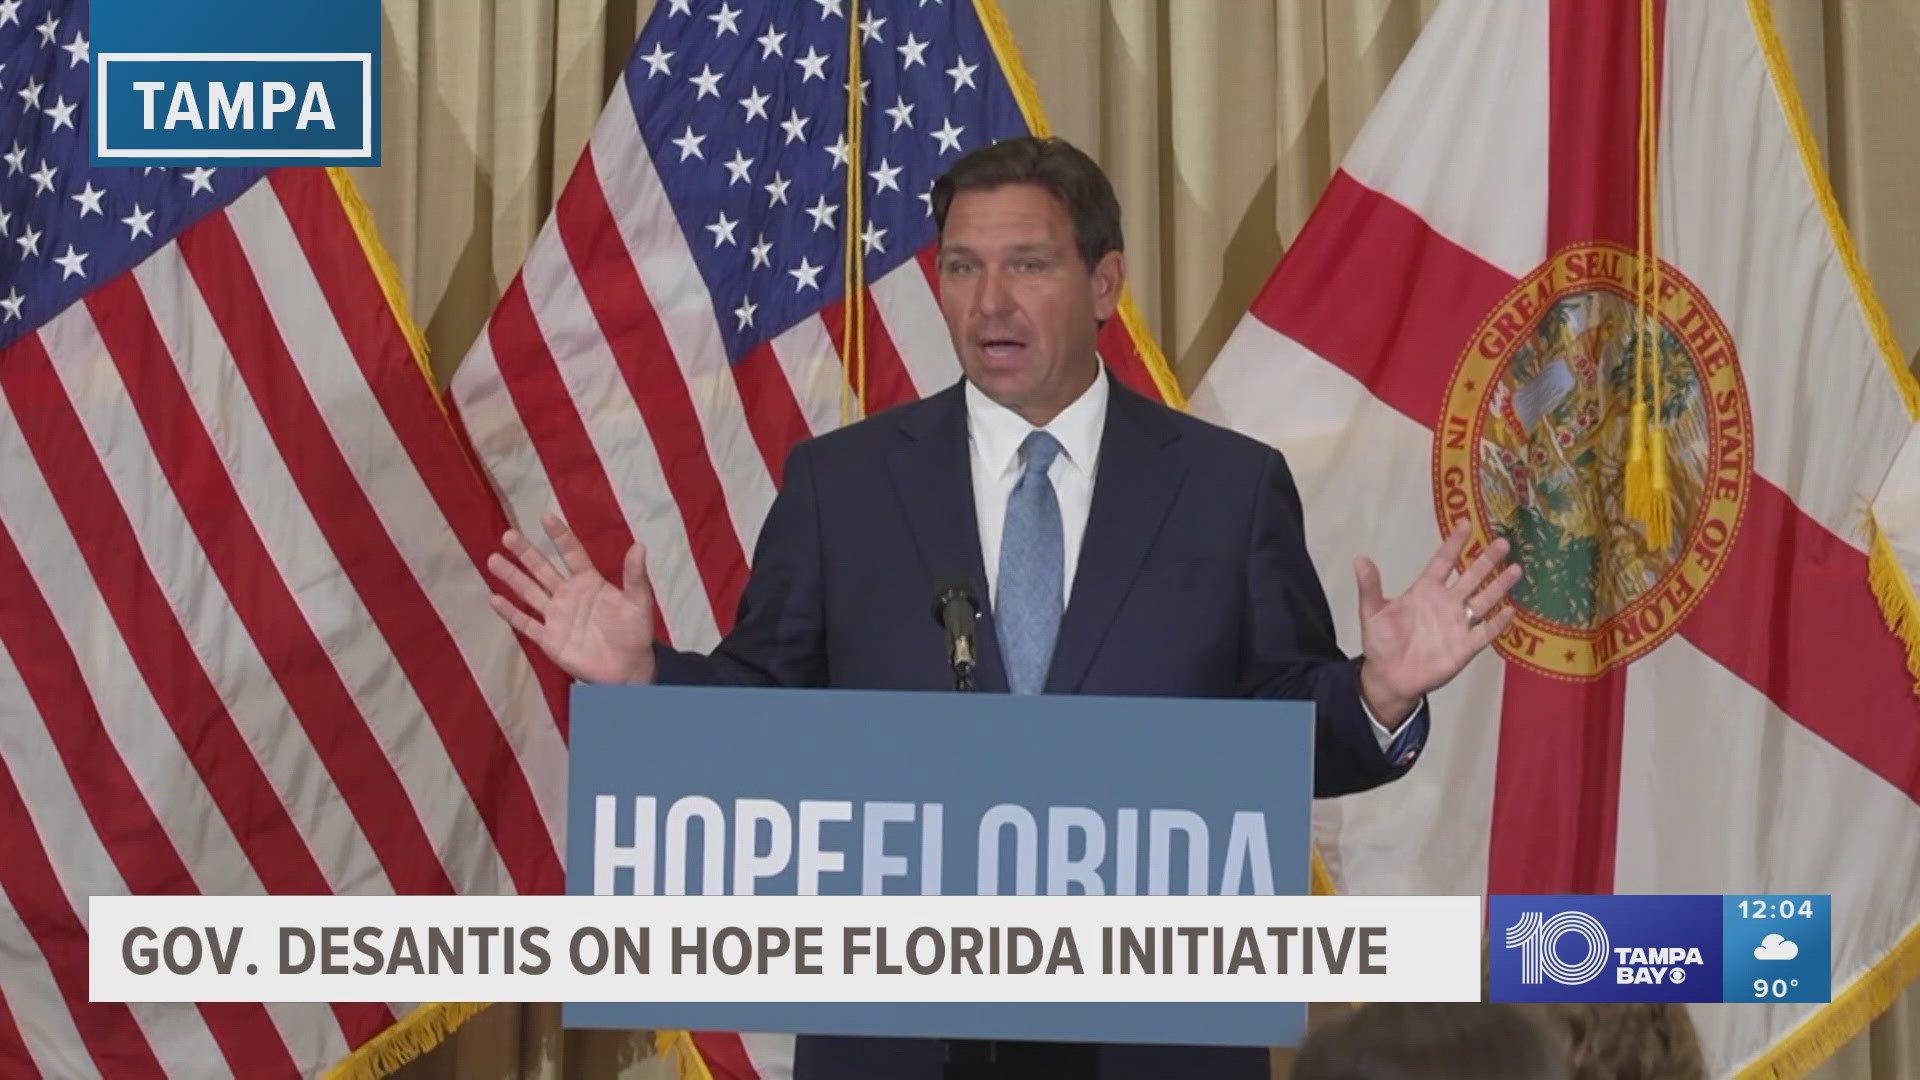 At his press conference, the governor talked about Hope Florida, which helps residents in need find resources through one portal.